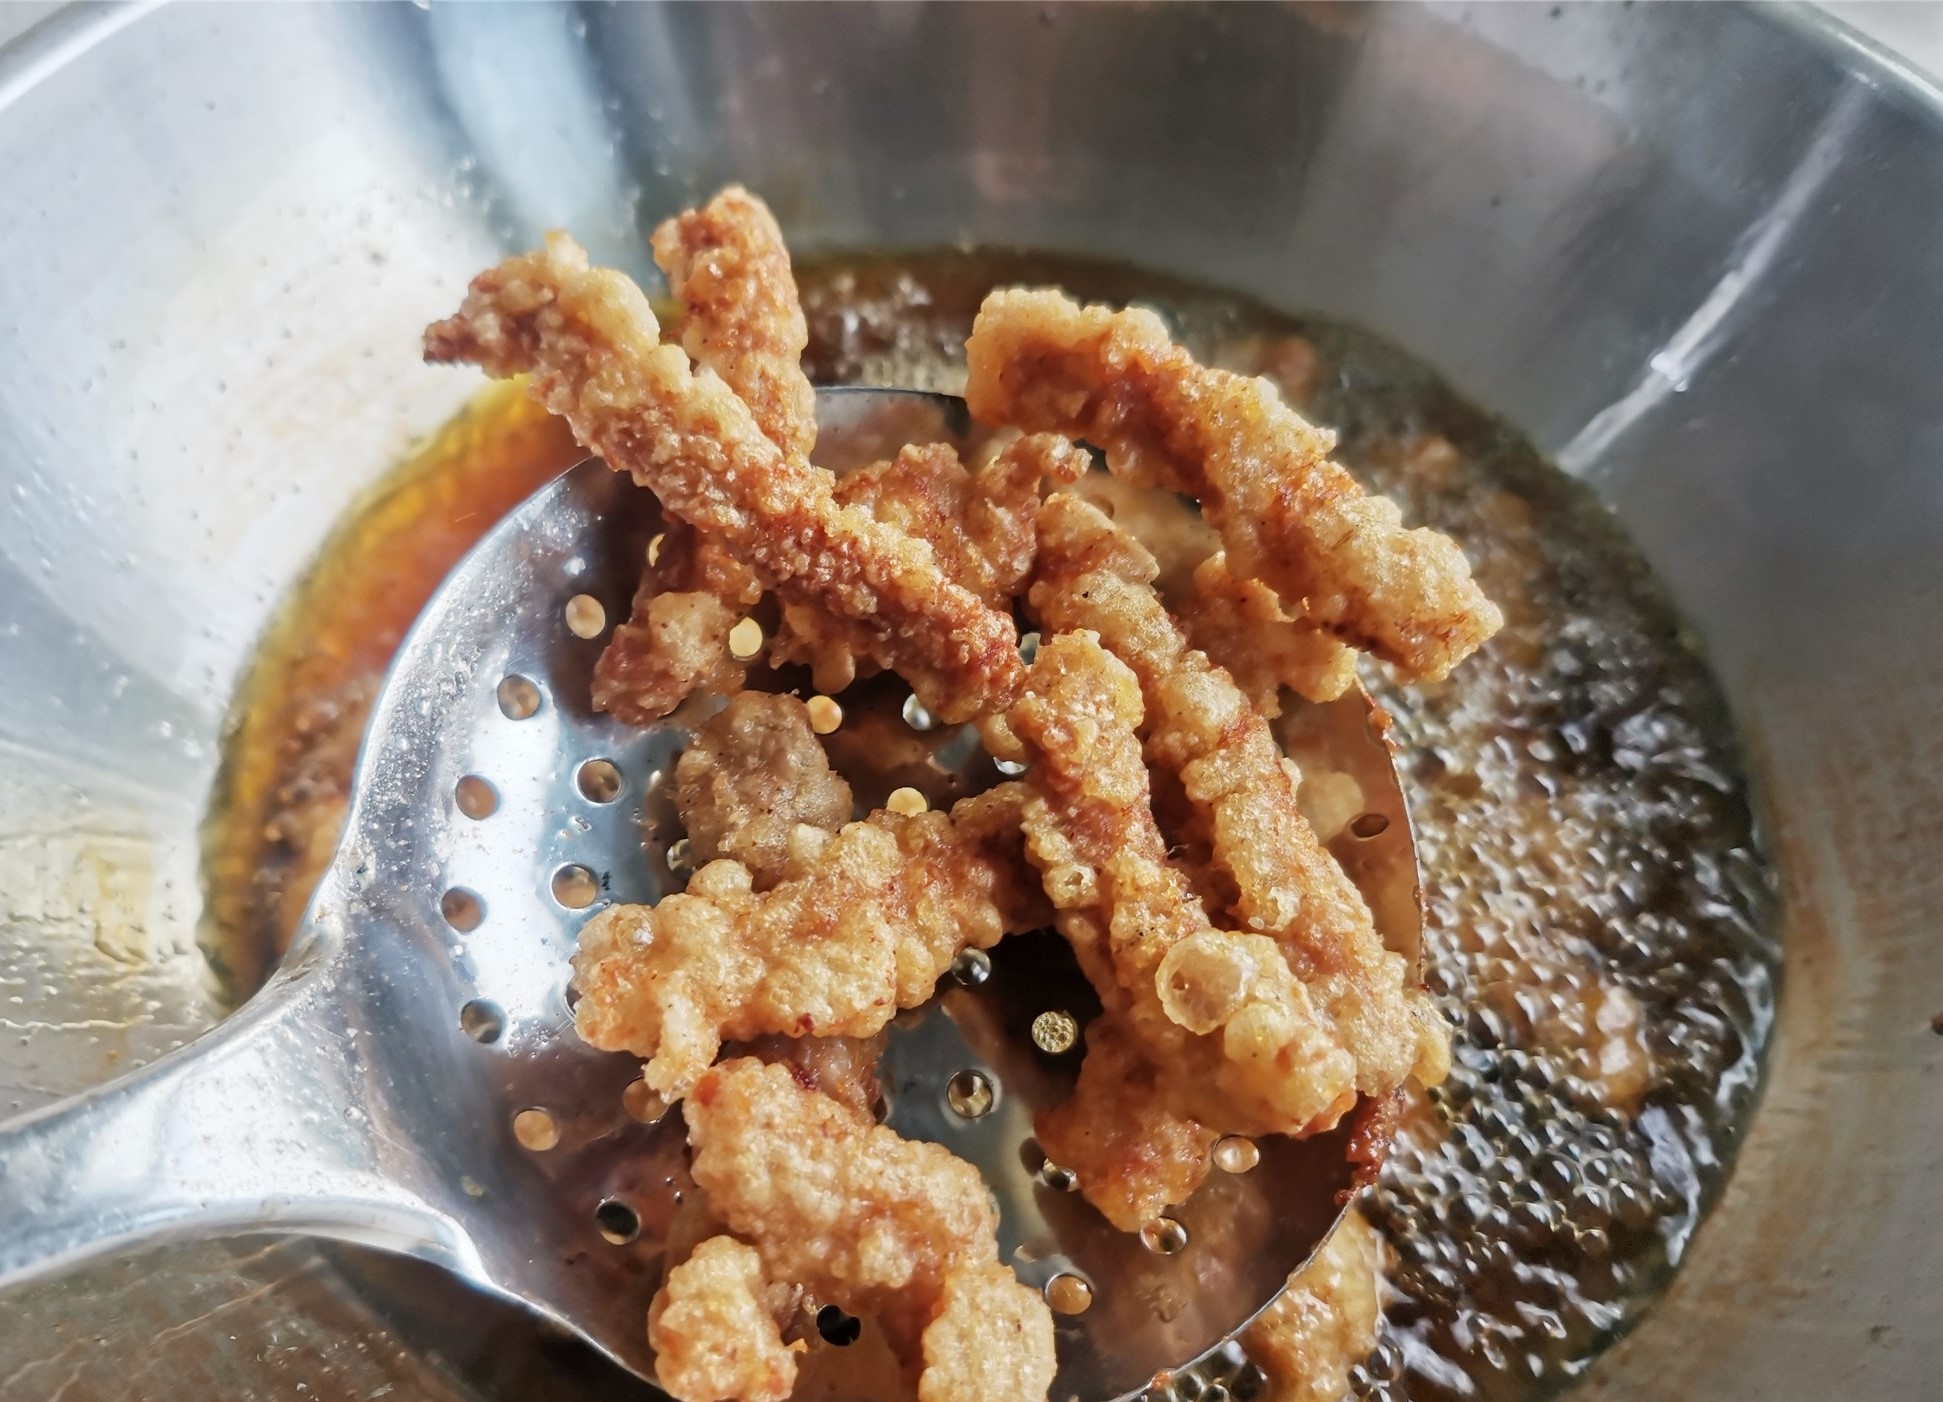 Fry the meat strips until golden brown